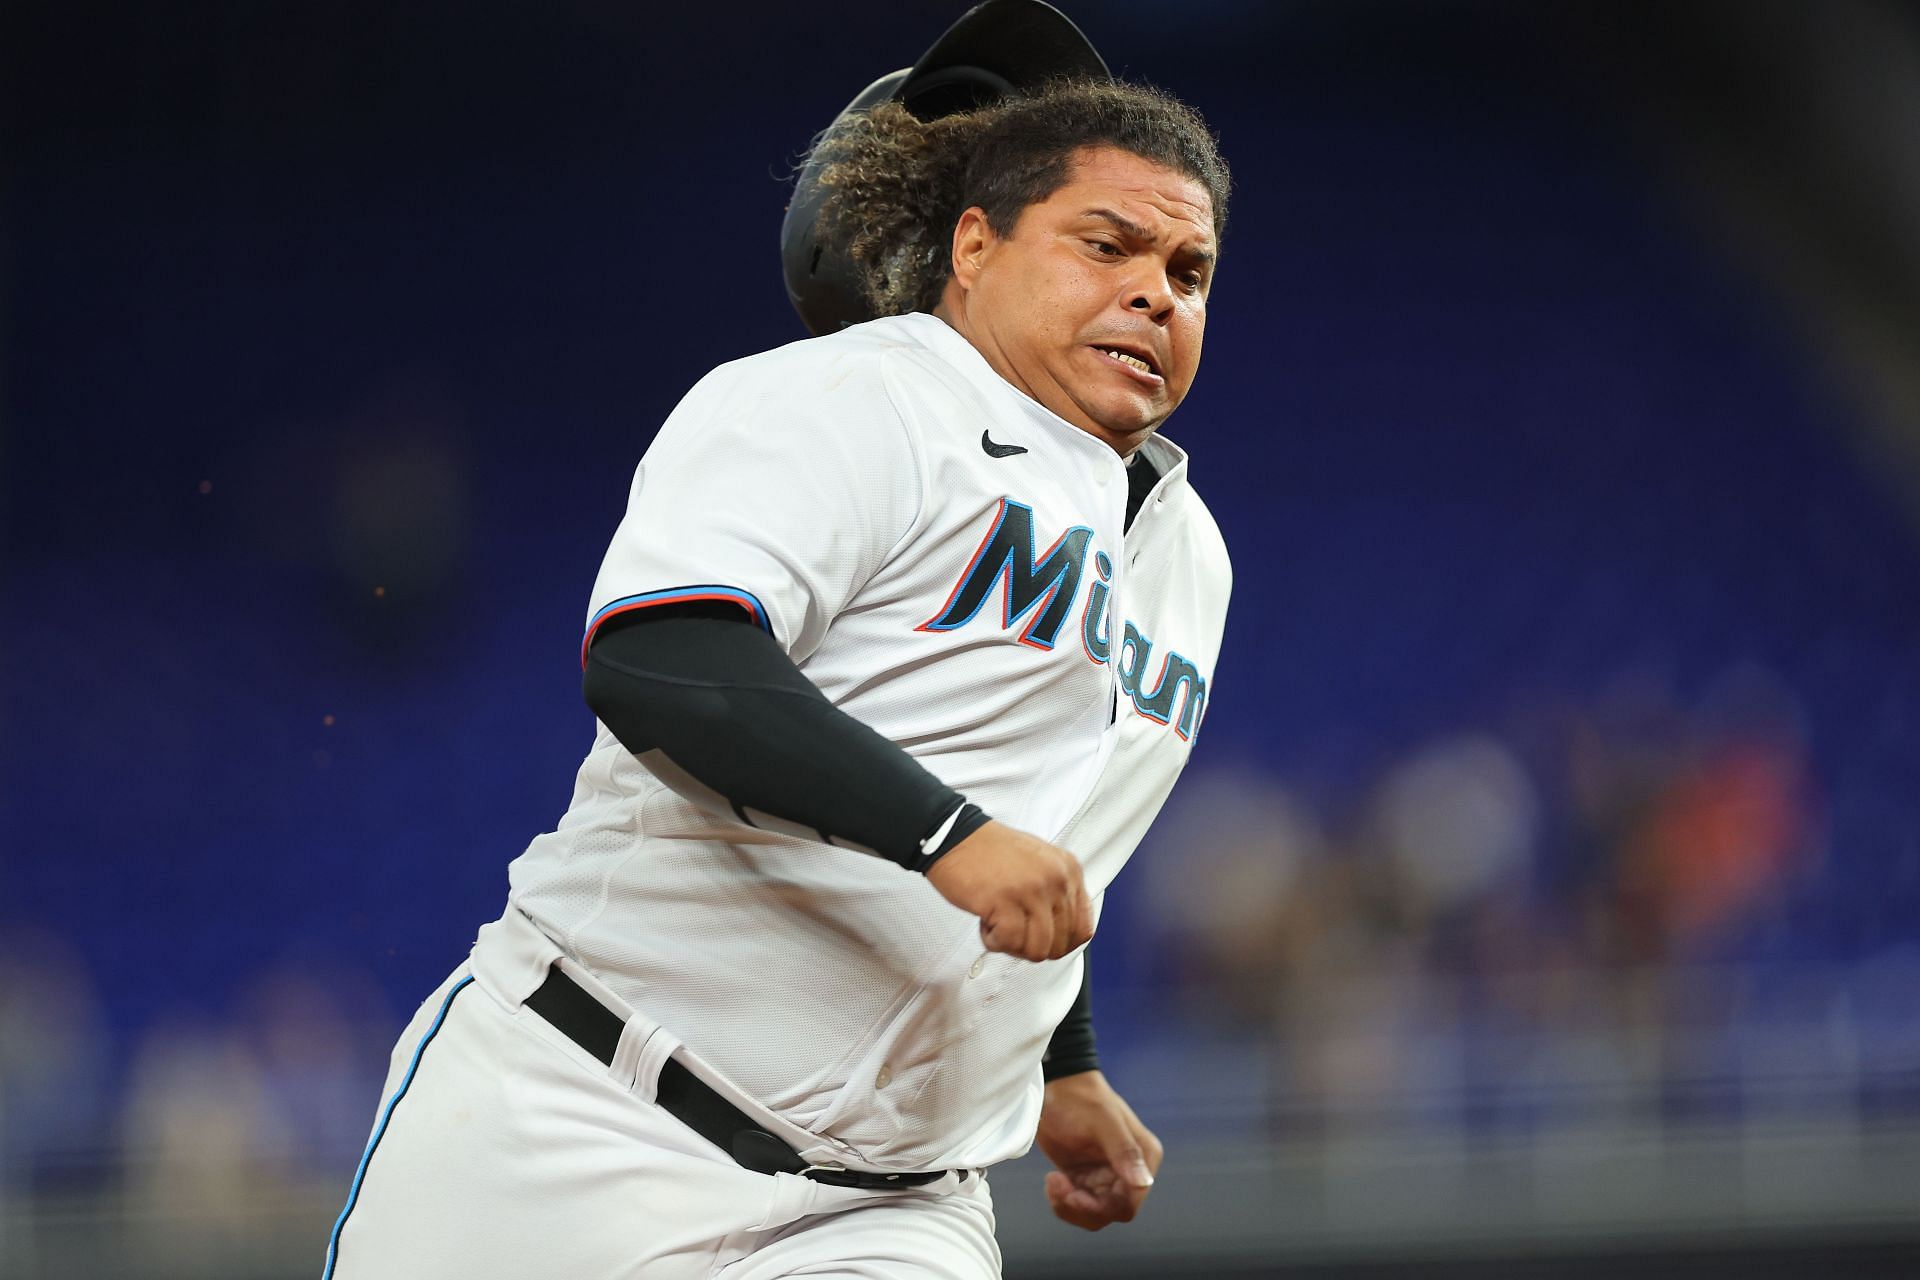 Jesús Aguilar drives in 3 runs, Marlins outlast Nationals 11-8